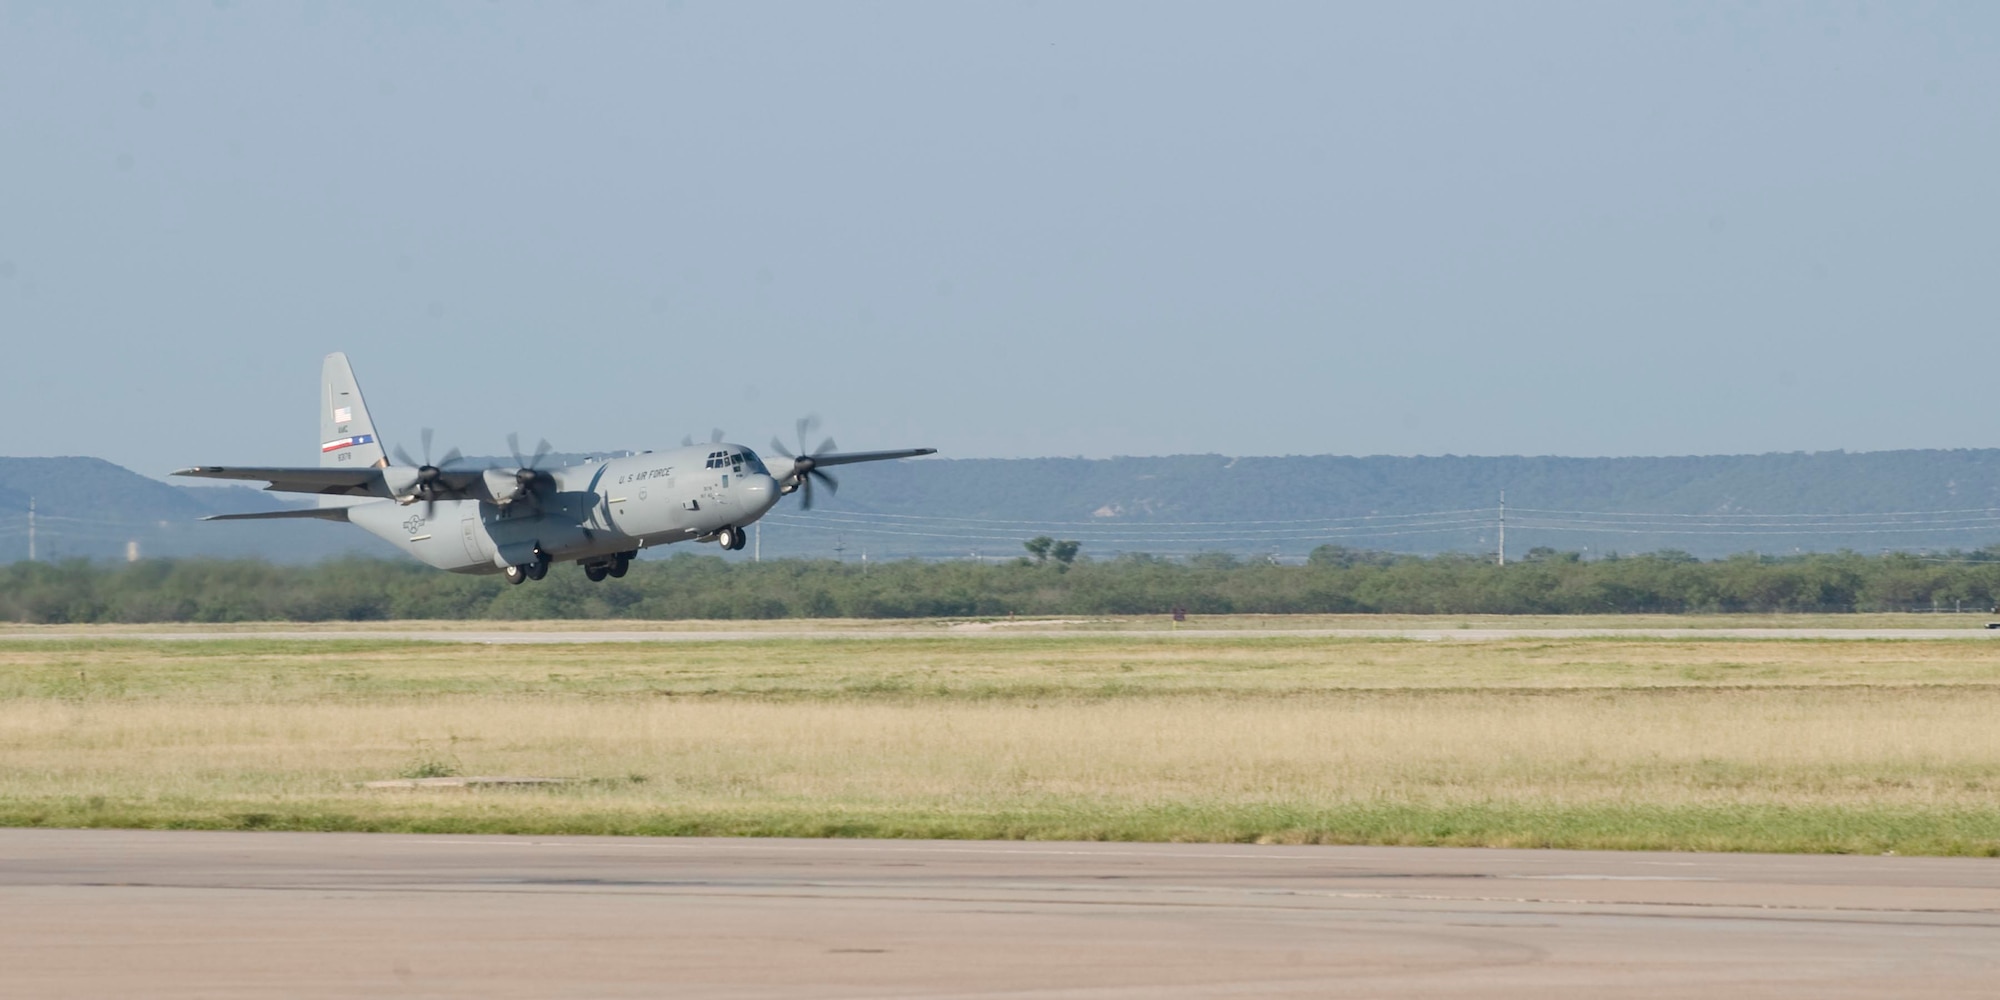 A C-130 J-model from the 317th Airlift Group takes off Sept. 3, 2013, from Dyess Air Force Base, Texas. Members of the 39th Airlift Squadron recently deployed in support of U.S. Central Command. This is the first deployment that has had a complete fleet of C-130 J-model aircraft from the 317th AG. (U.S. Air Force photo by Airman 1st Class Kylsee Wisseman)